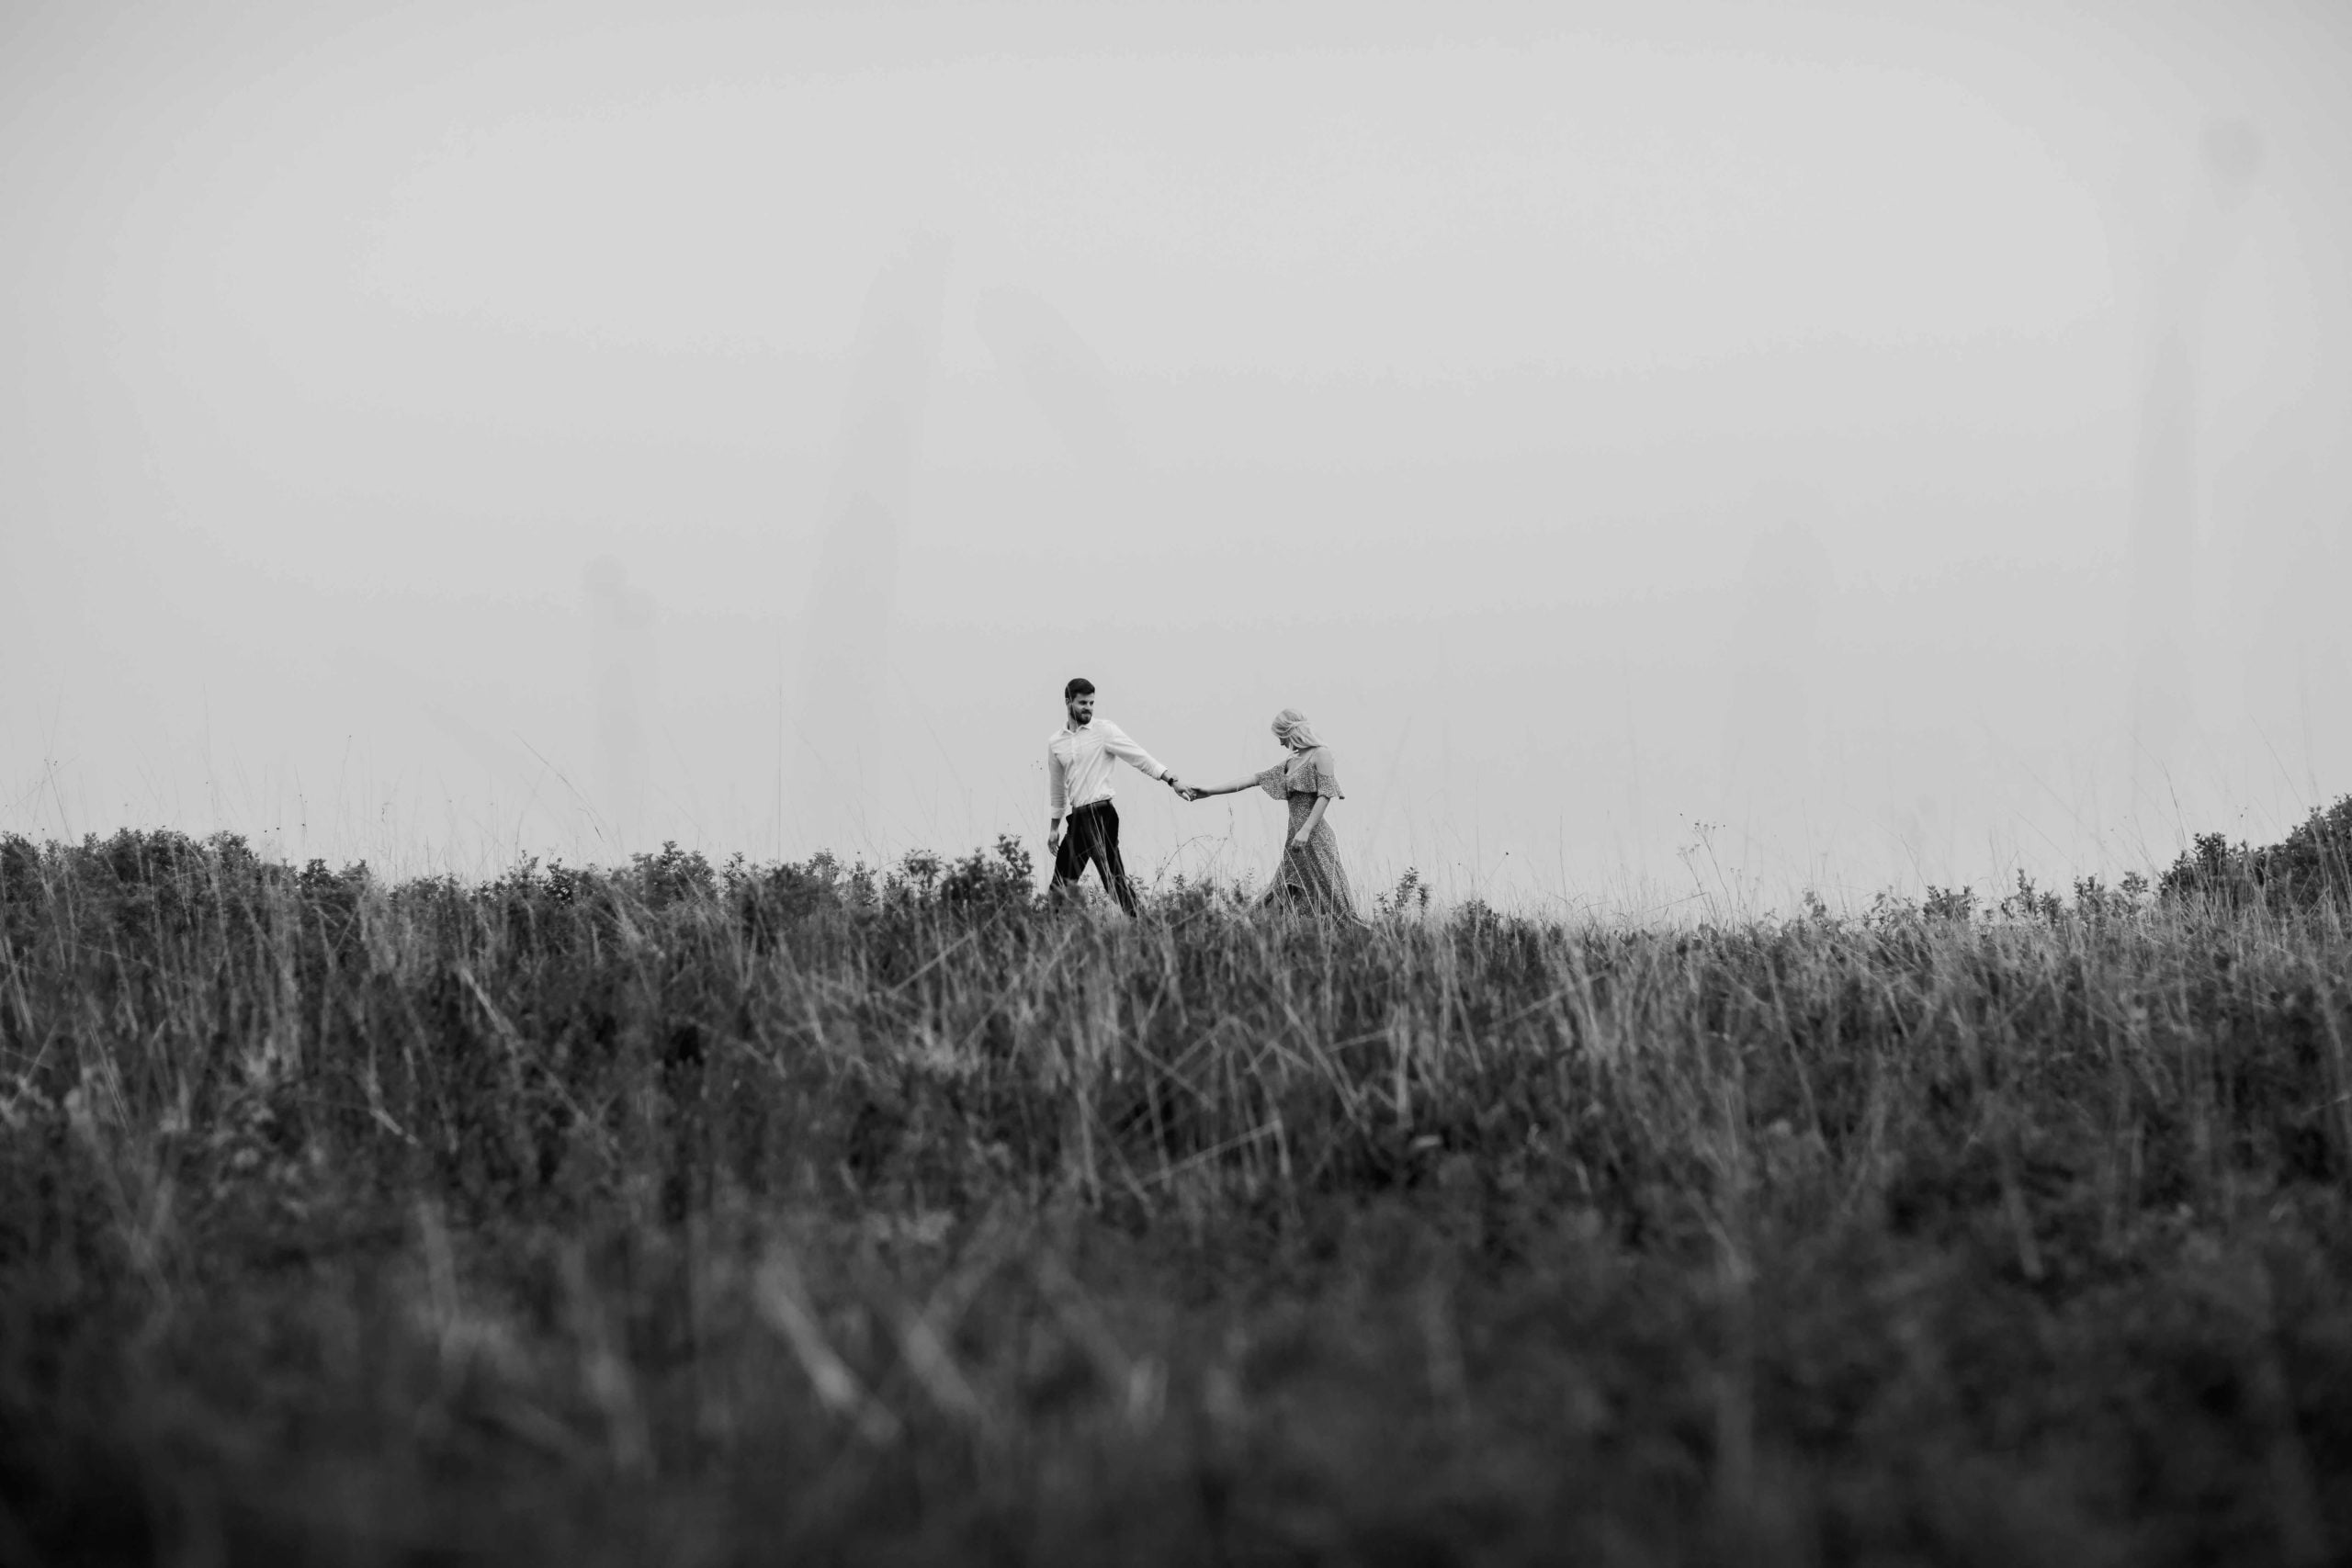 Leroy Oakes Engagement Photography by Saint Charles Illinois Photographer From far away in a field